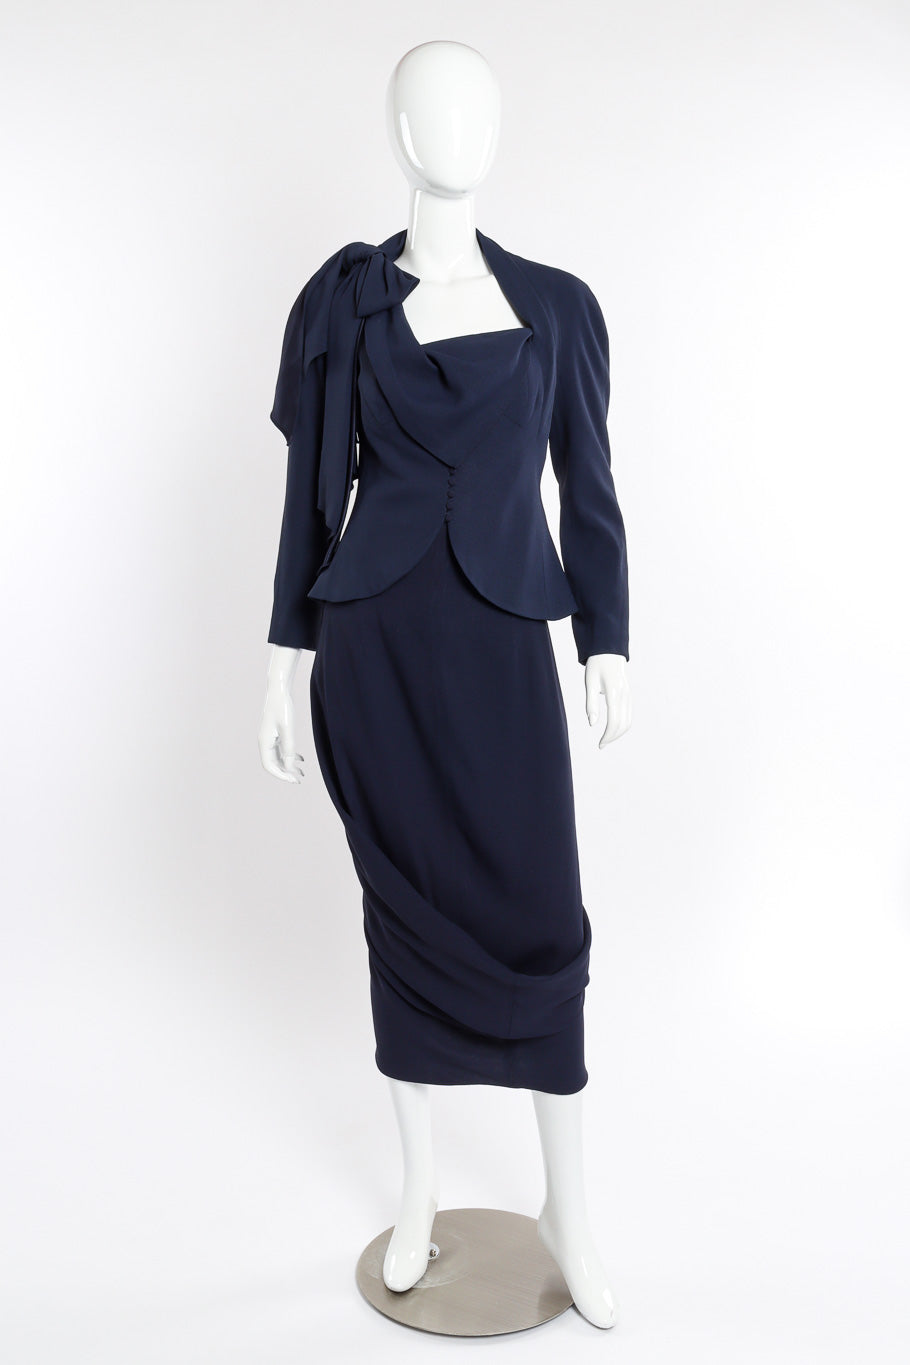 Vintage John Galliano 1999 S/S Draped Jacket and Skirt Set front view on mannequin @recessla